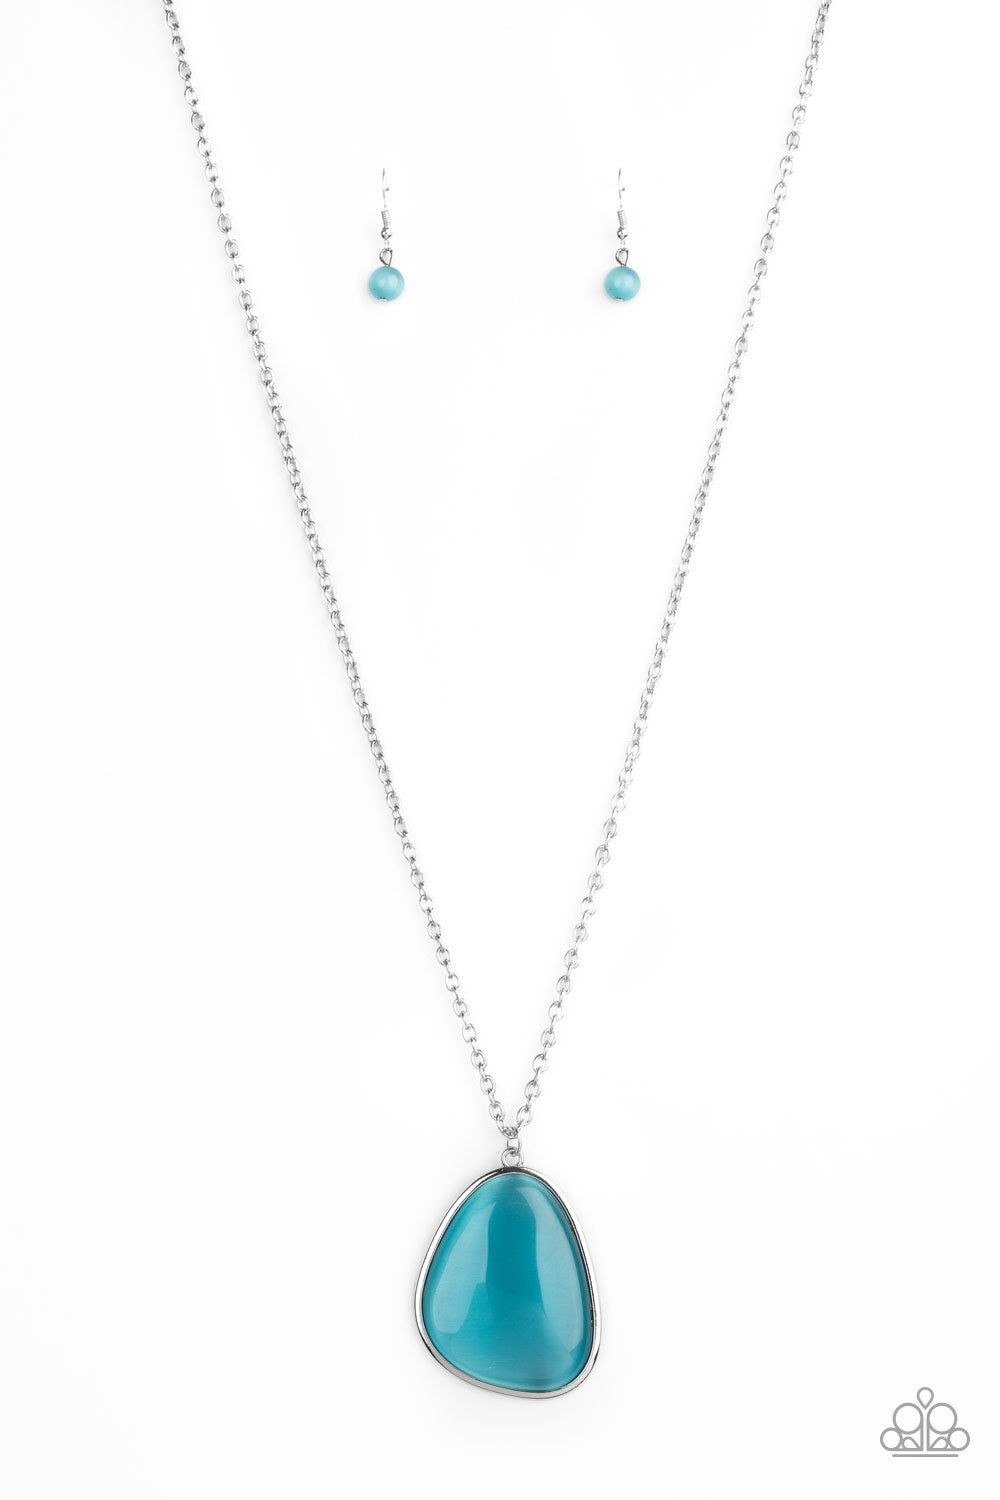 Ethereal Experience - blue - Paparazzi necklace